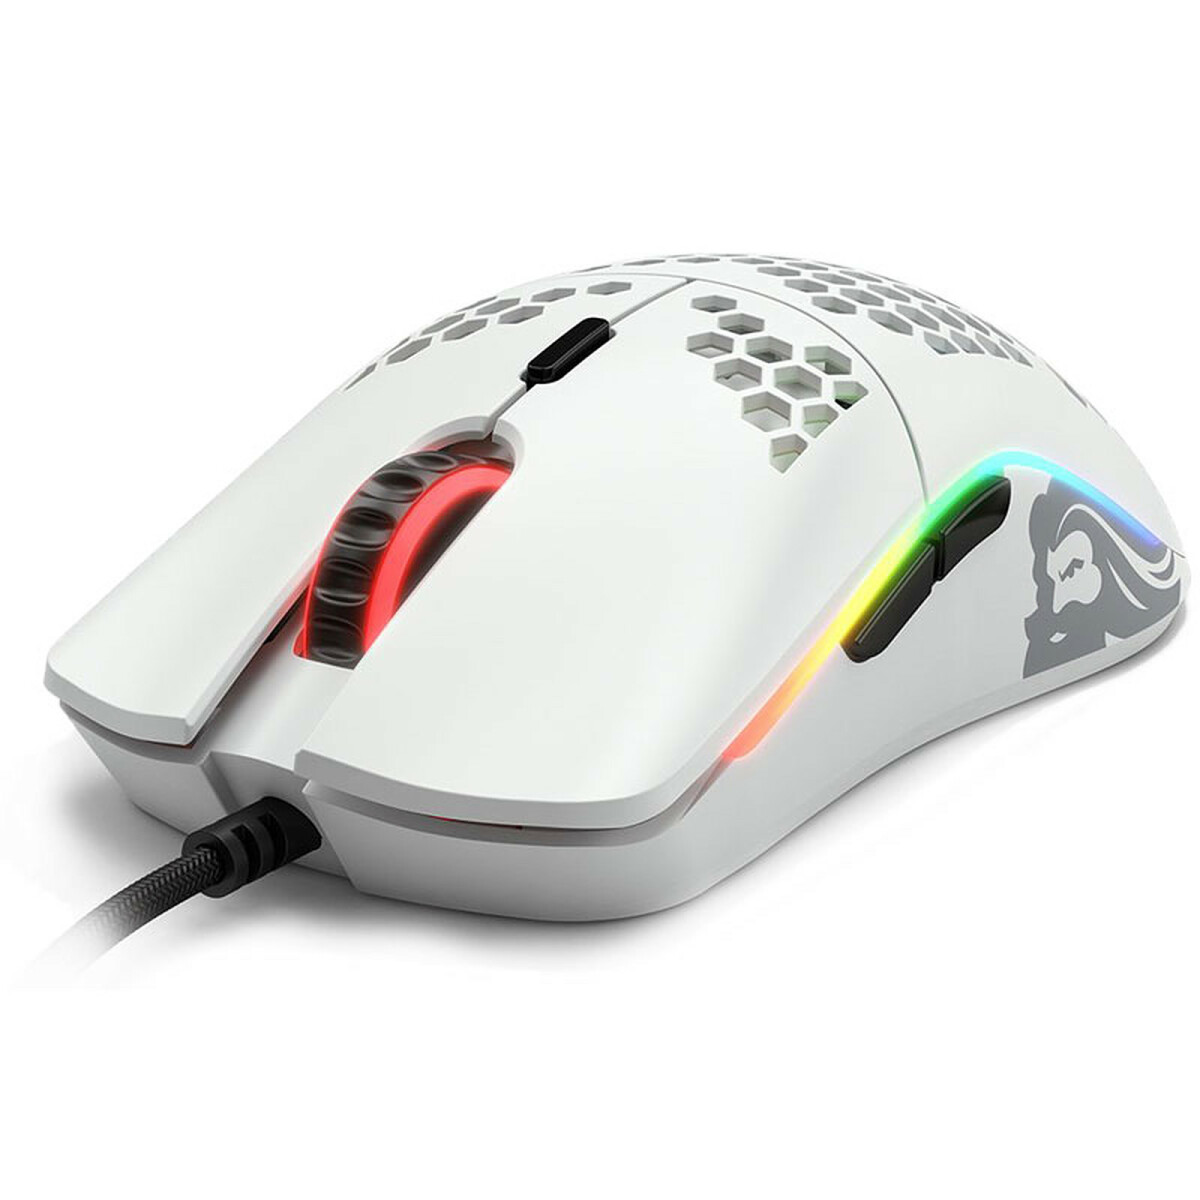 Glorious Pc Gaming Race Model O Souris Gaming - Blanche